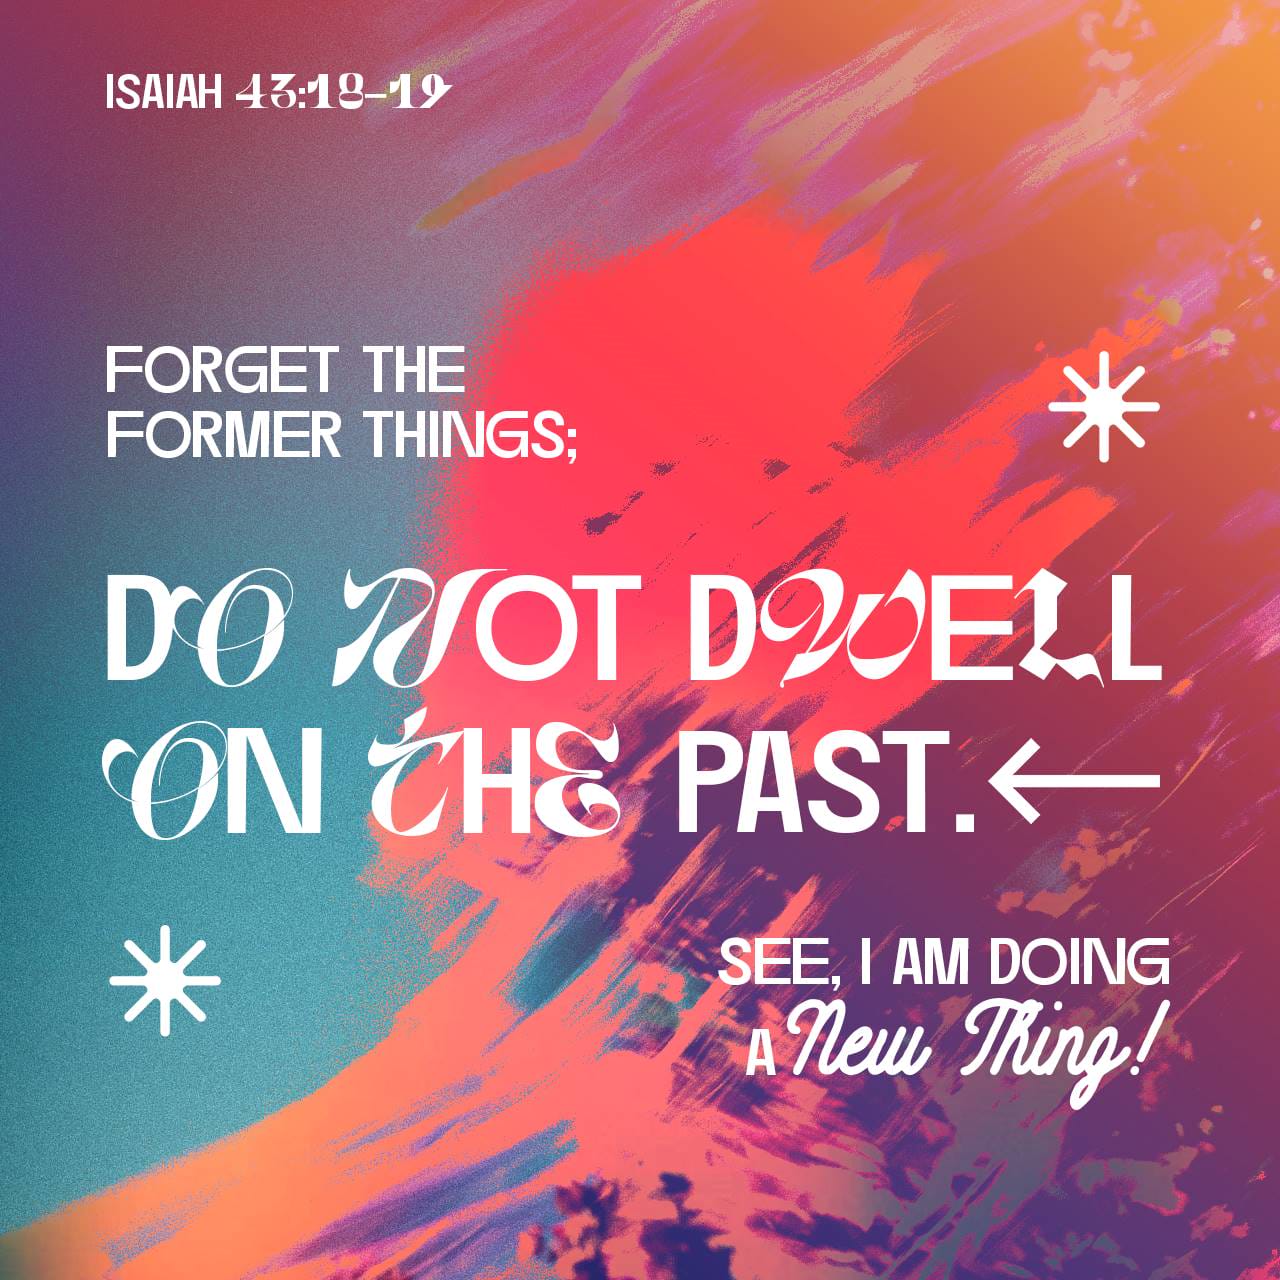 Isaiah 43:18-19 “Remember not the former things, nor consider the